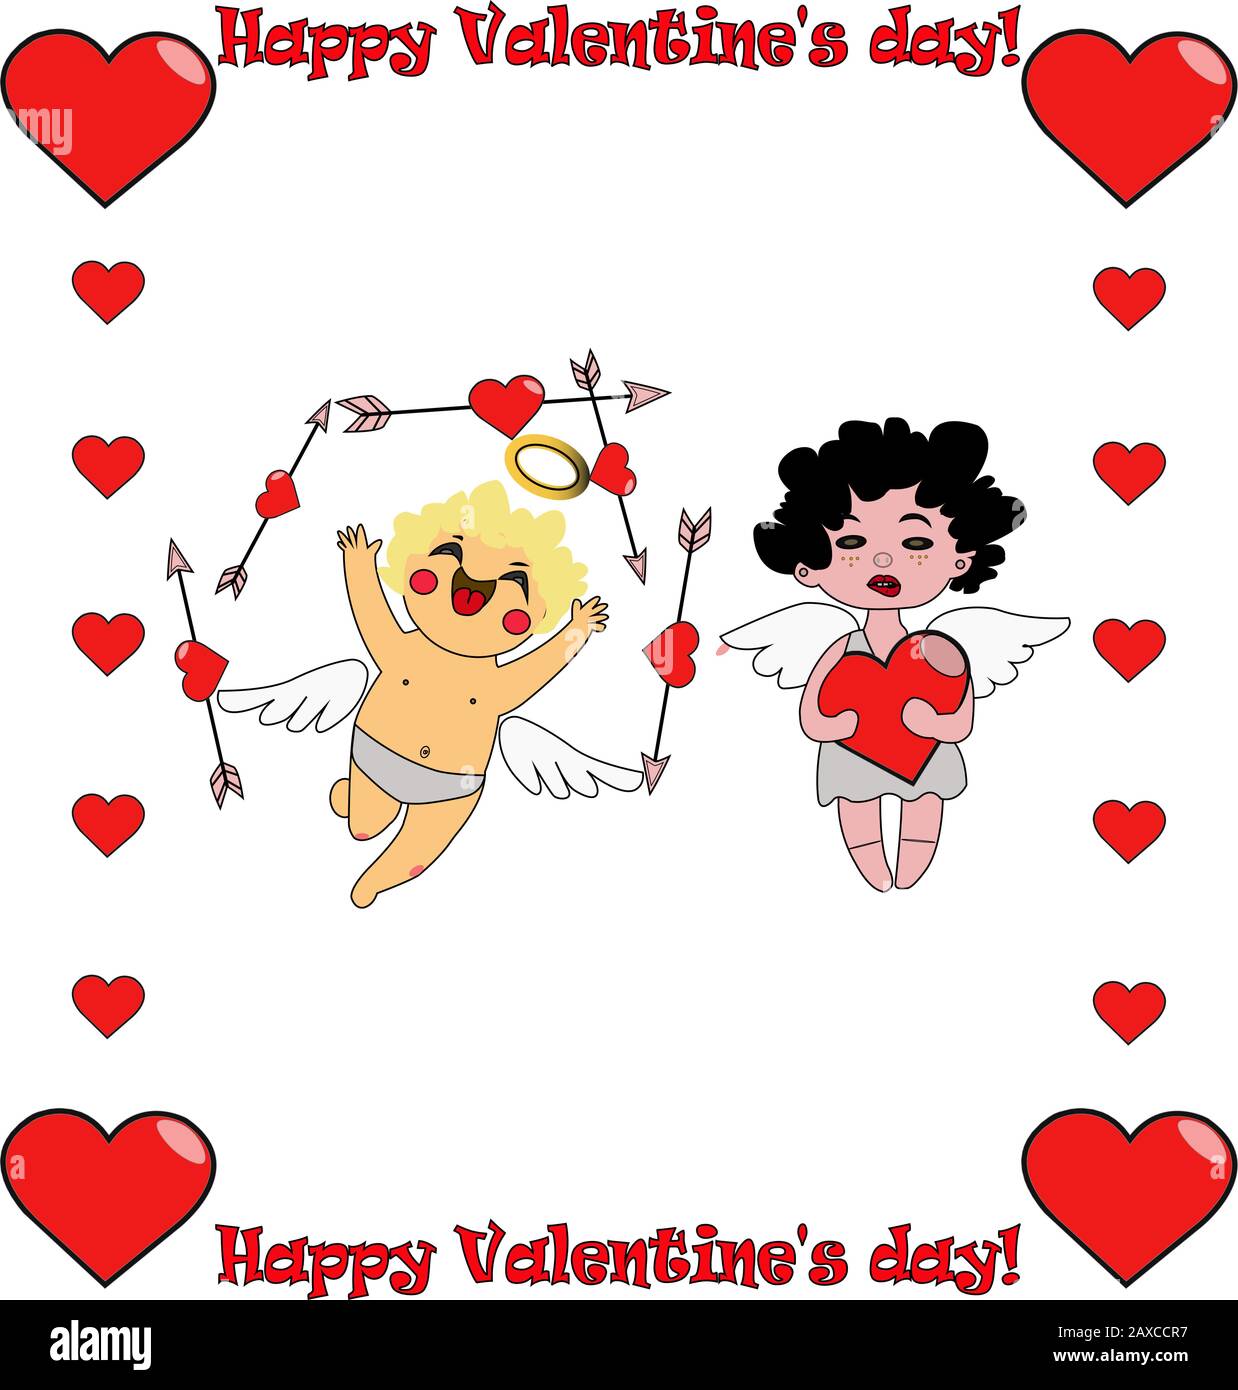 Cupid and the girl angel are in love. St. Valentine's Day Stock Vector